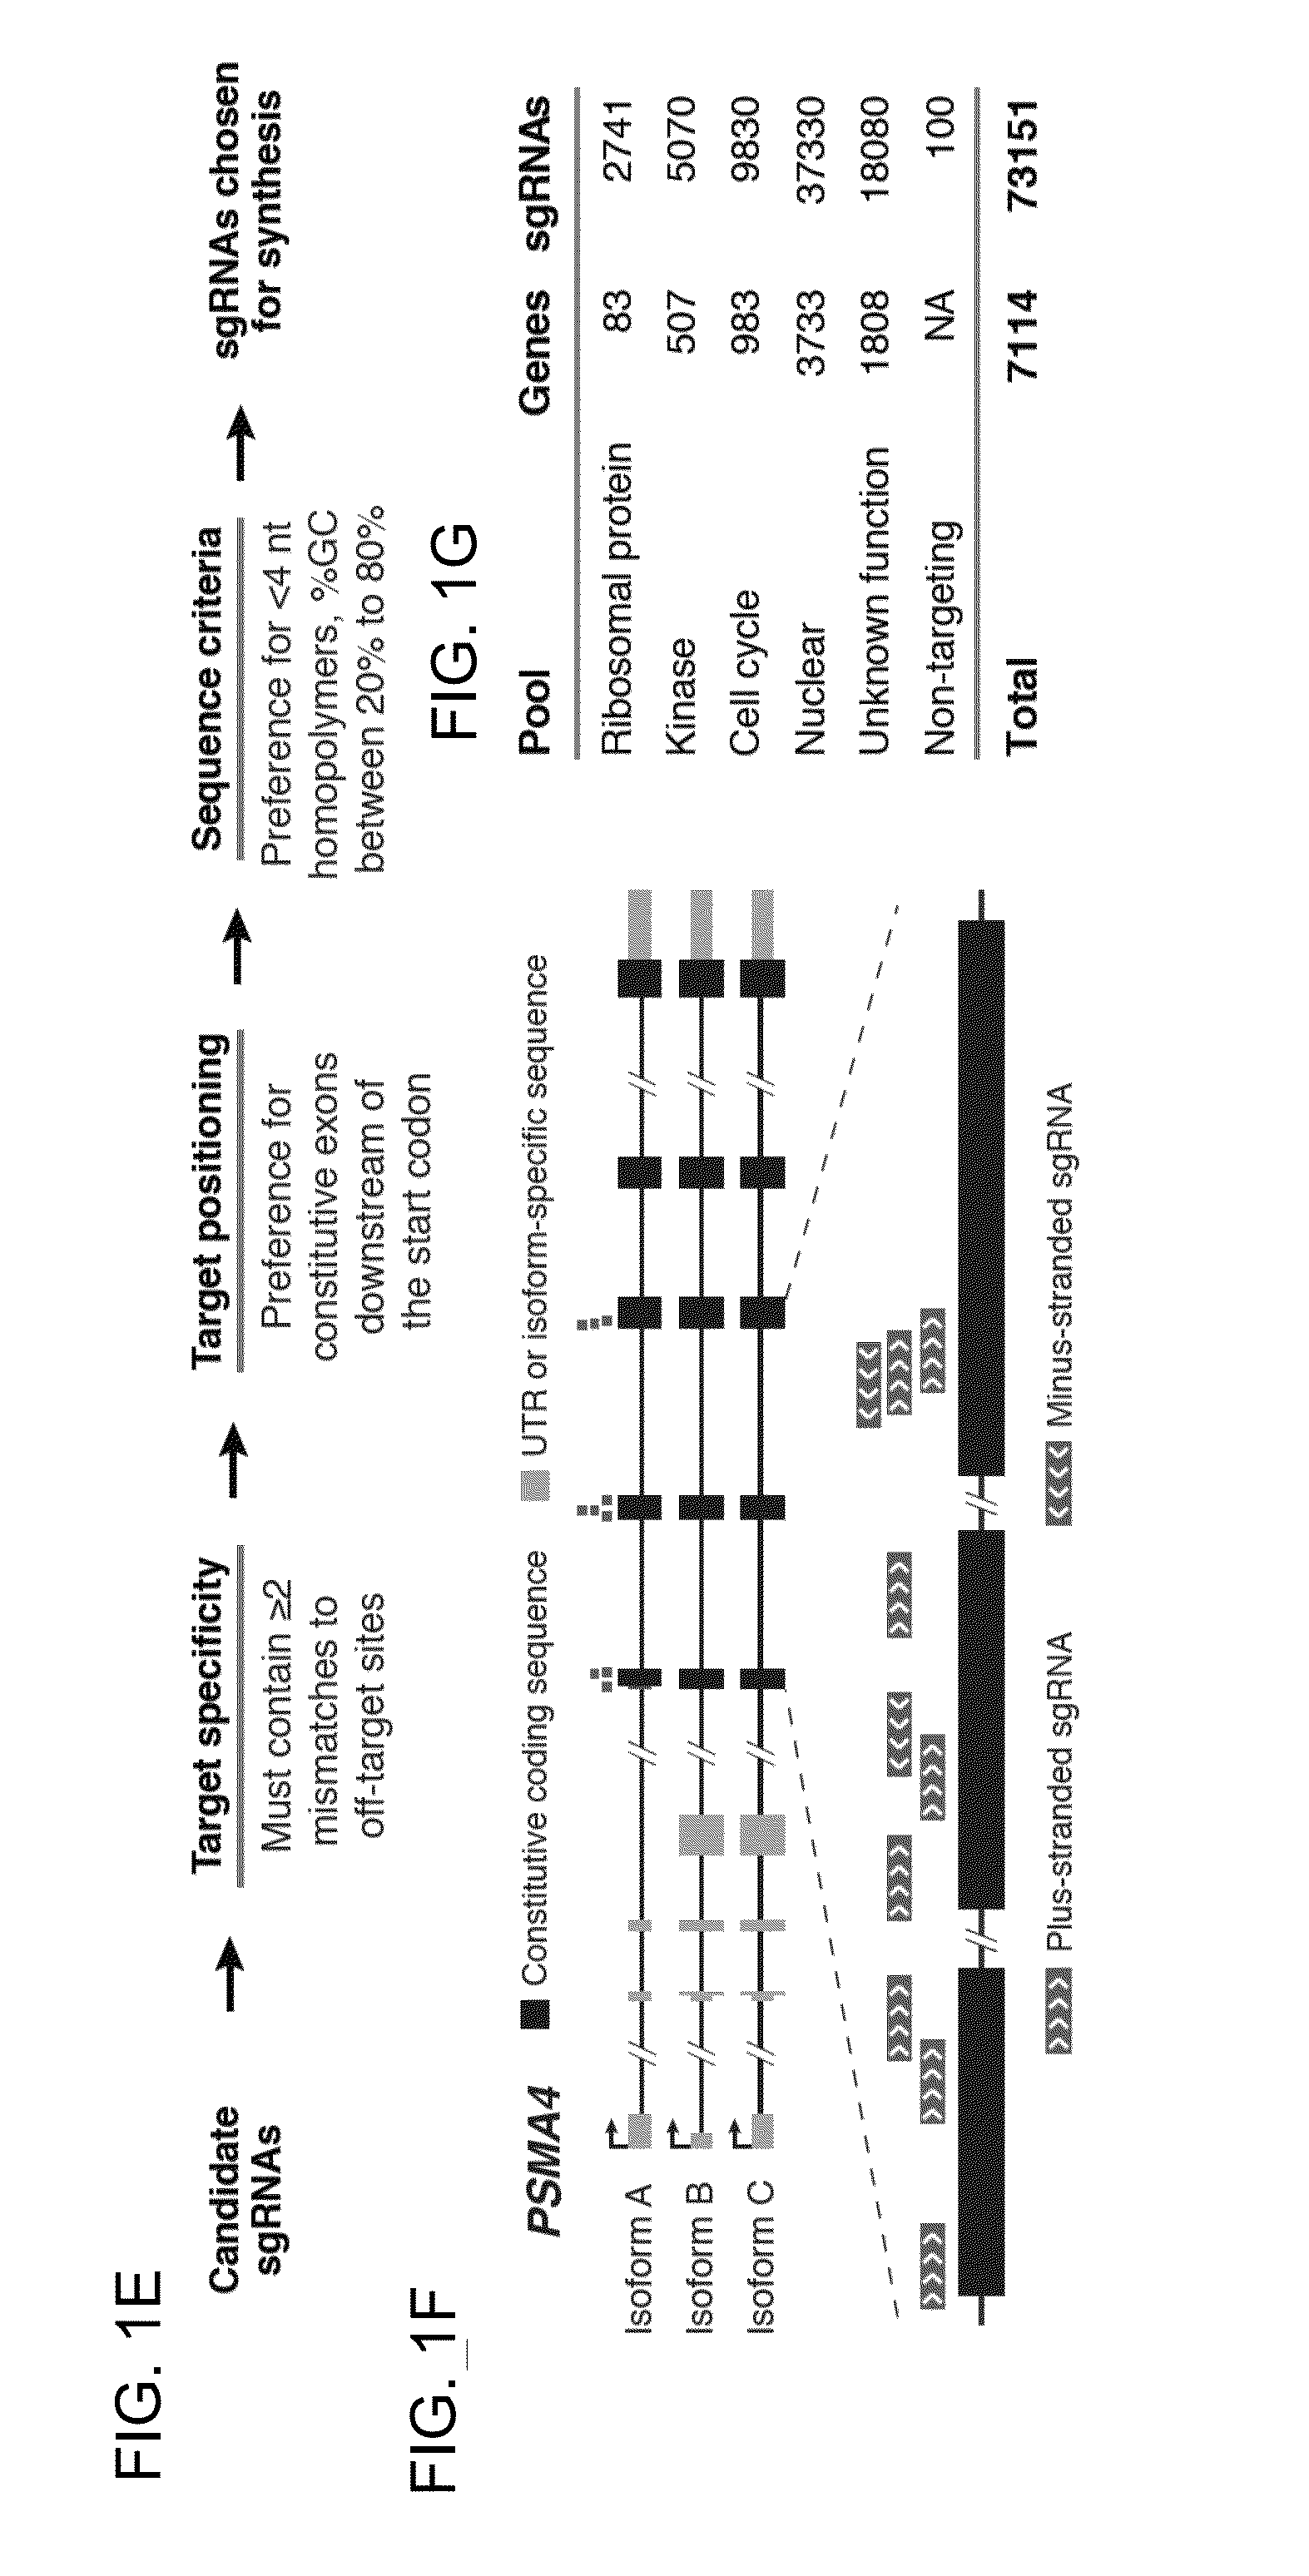 Functional genomics using crispr-cas systems, compositions, methods, screens and applications thereof